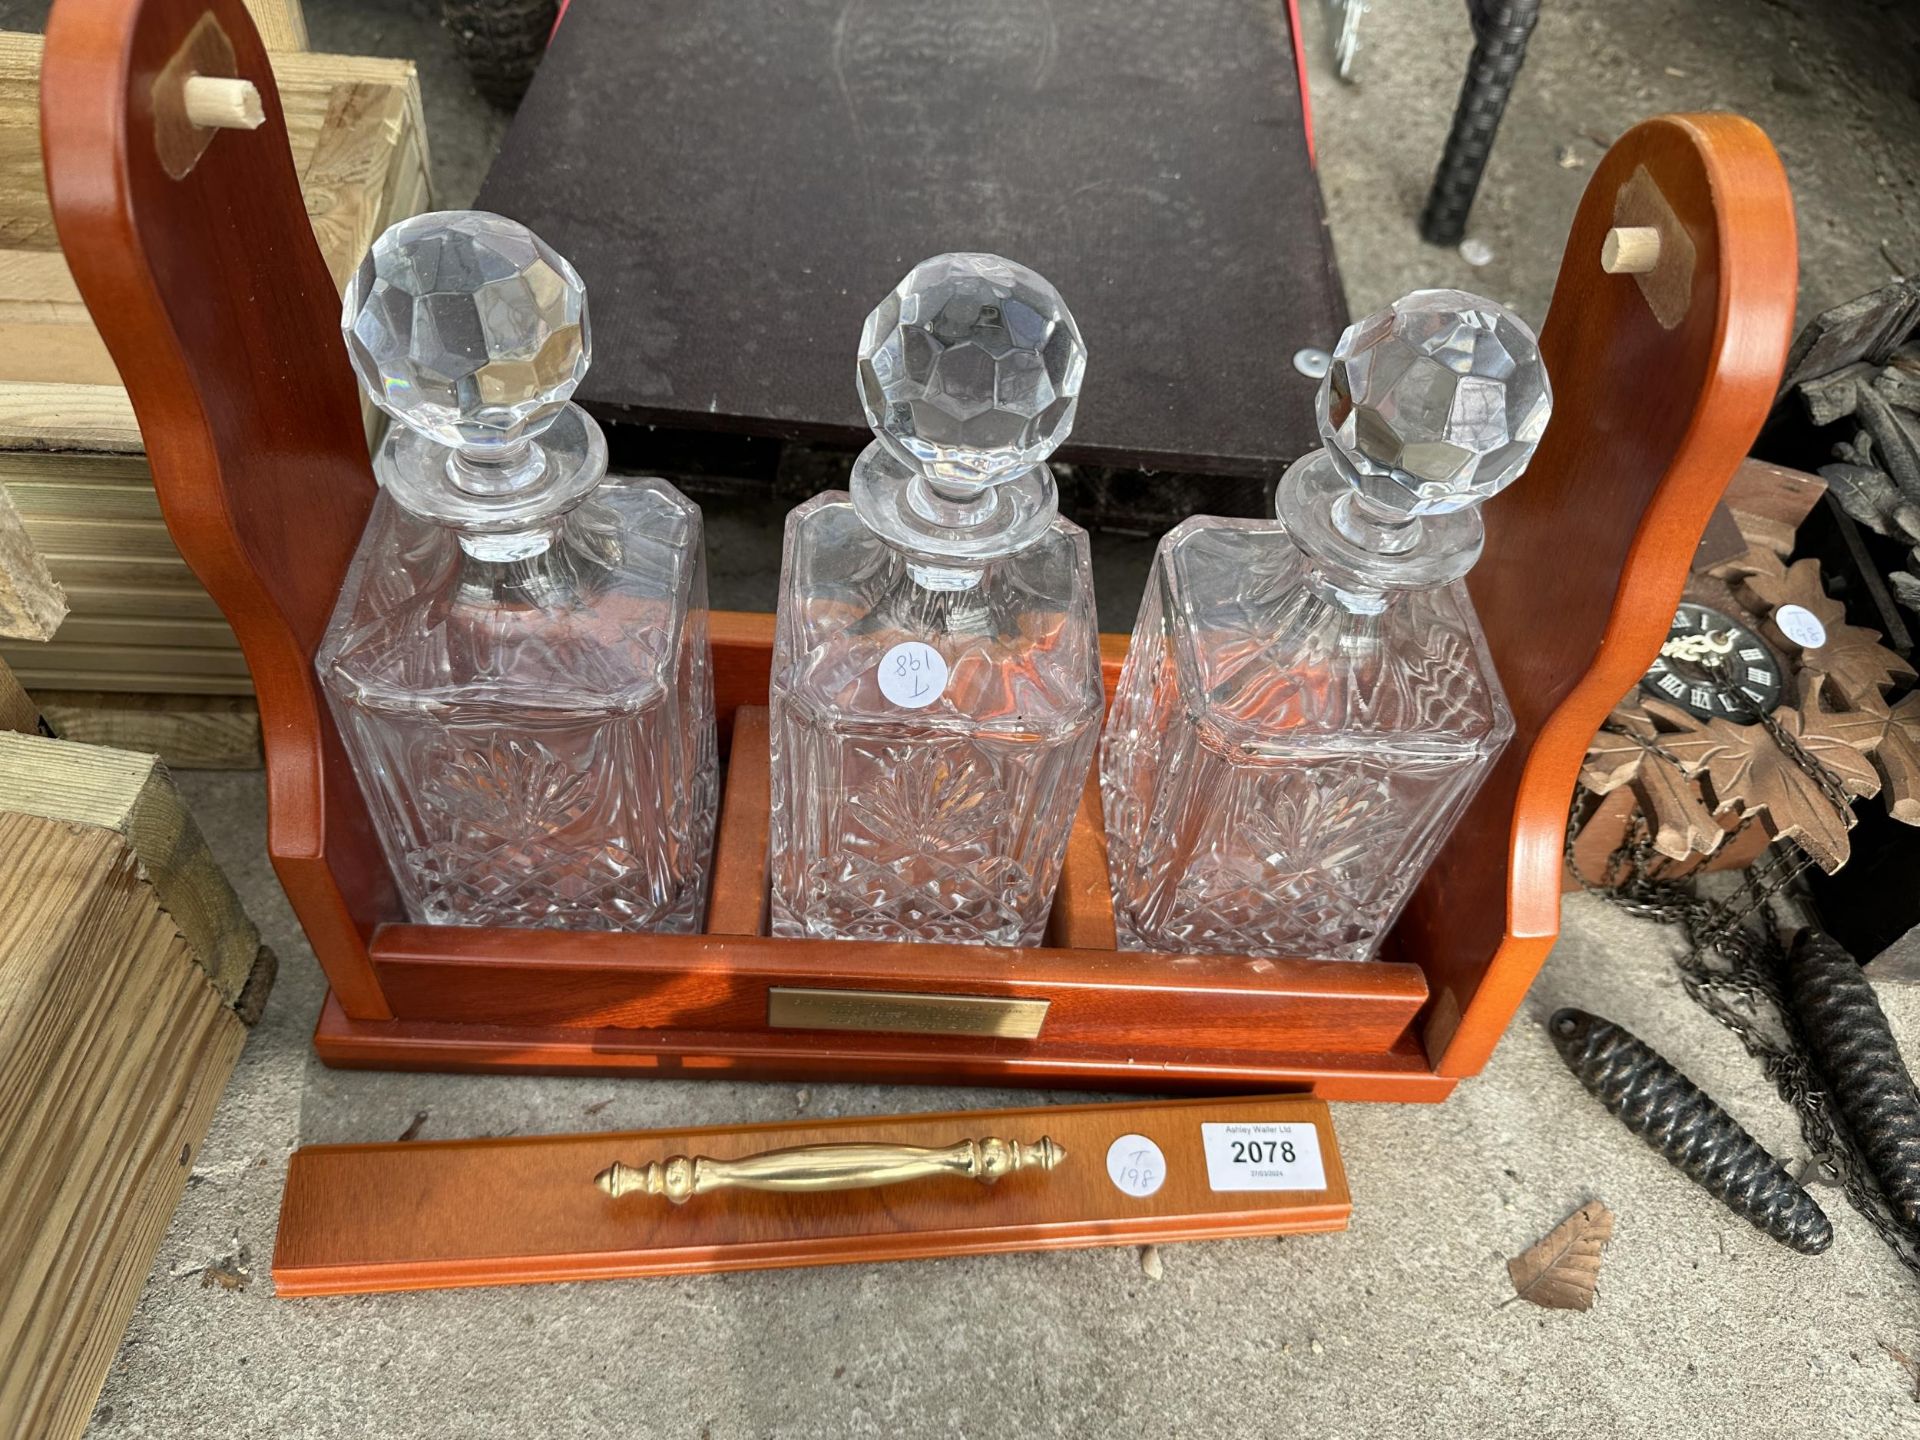 AN MDF TANTALUS AND THREE CUT GLASS DECANTERS